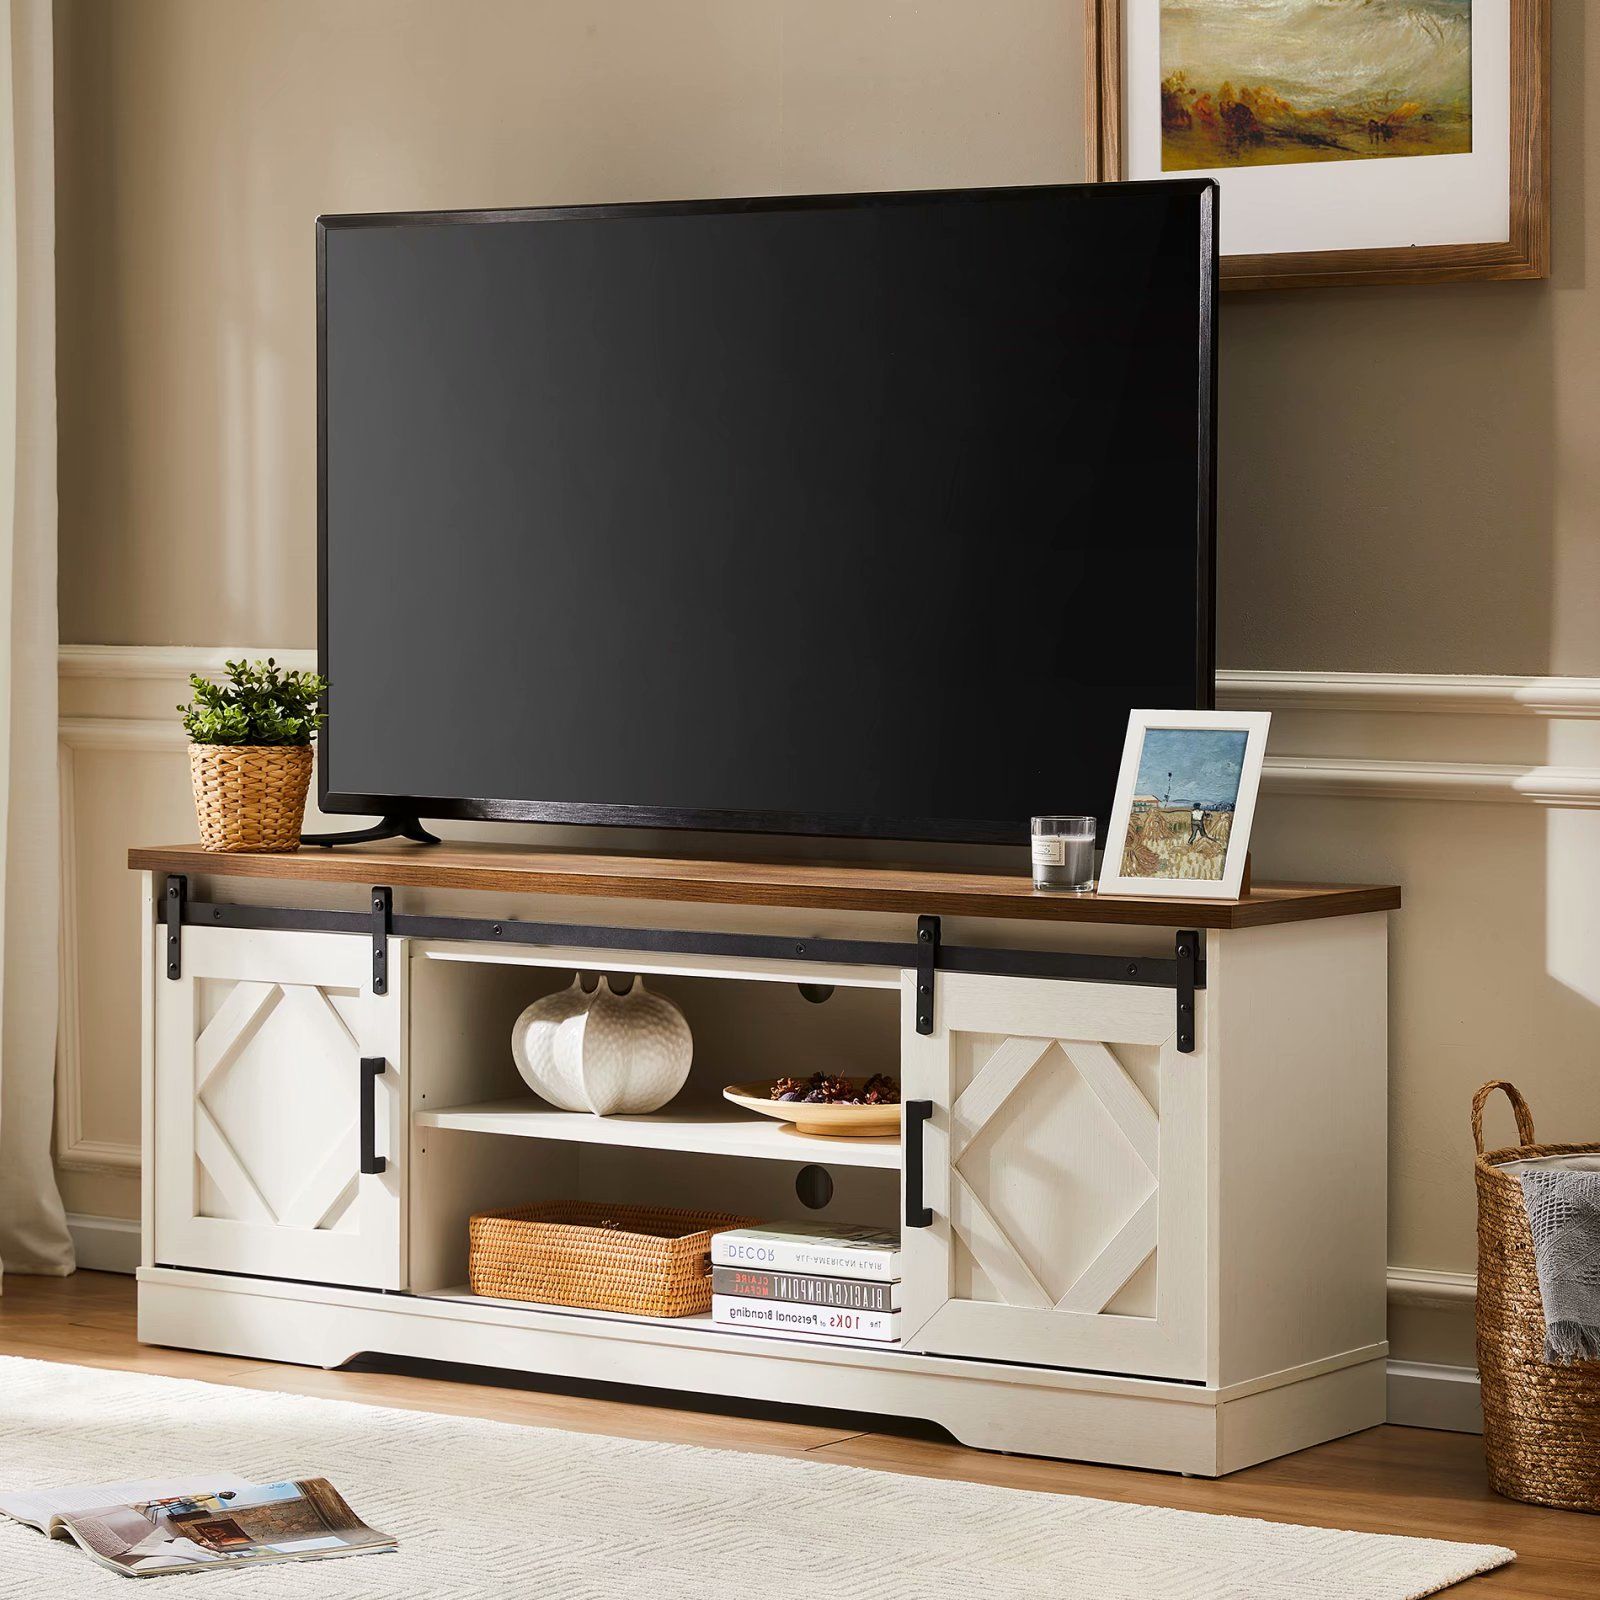 Farmhouse Tv Stand For Tv Up To 65",sliding Barn Door In Glass Shelves Tv Stands For Tvs Up To 65" (View 1 of 15)